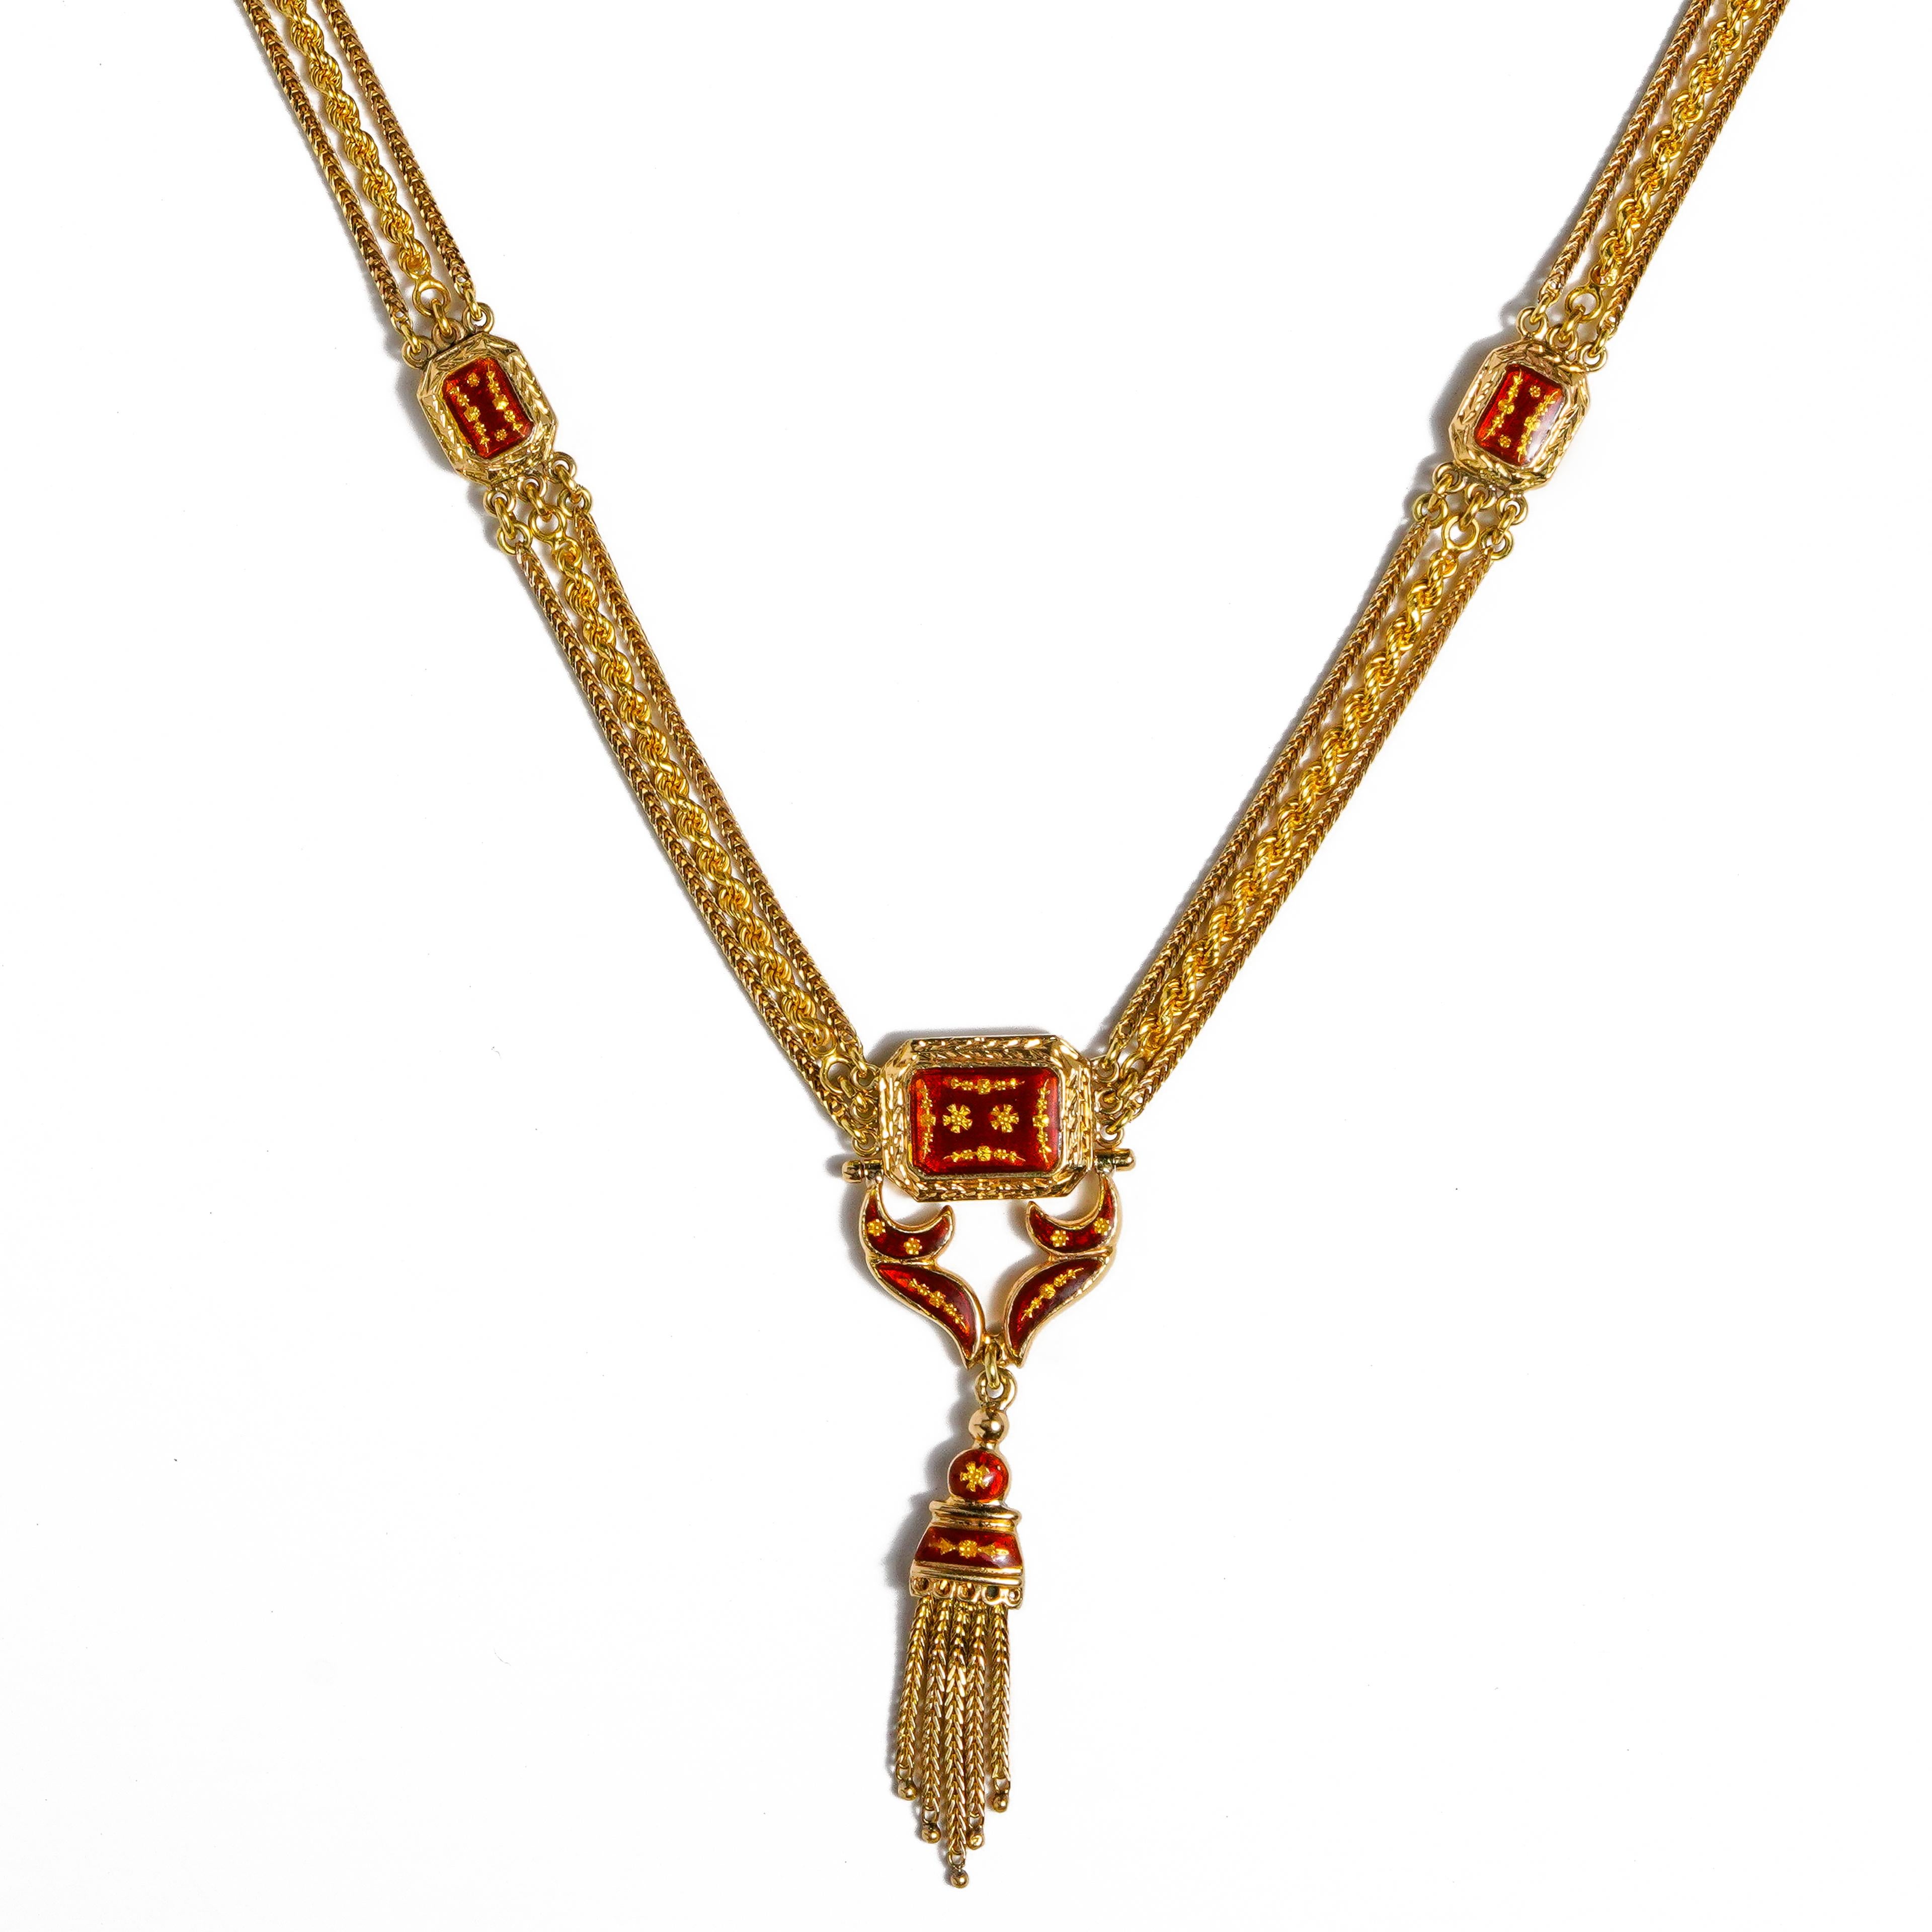 This necklace is crafted in yellow gold  with red enamel stations on one side and blue enamel stations on the other side.  The necklace has 3 chains consisting of rope and snake motif.  The necklace is 21 inches in length including the tassel.  The